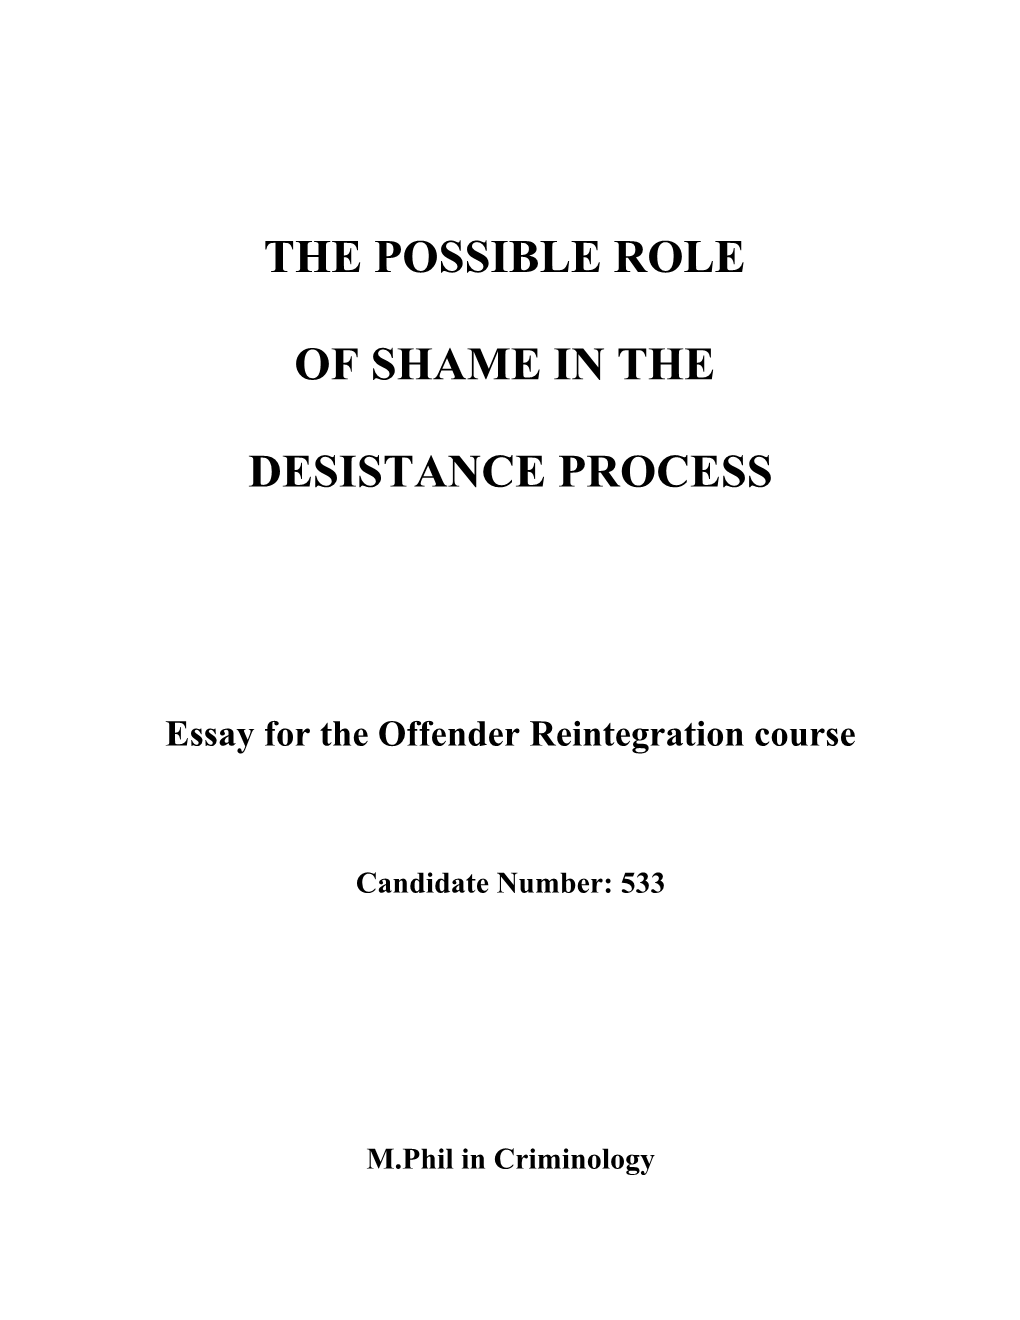 The Possible Role of Shame in the Desistance Process